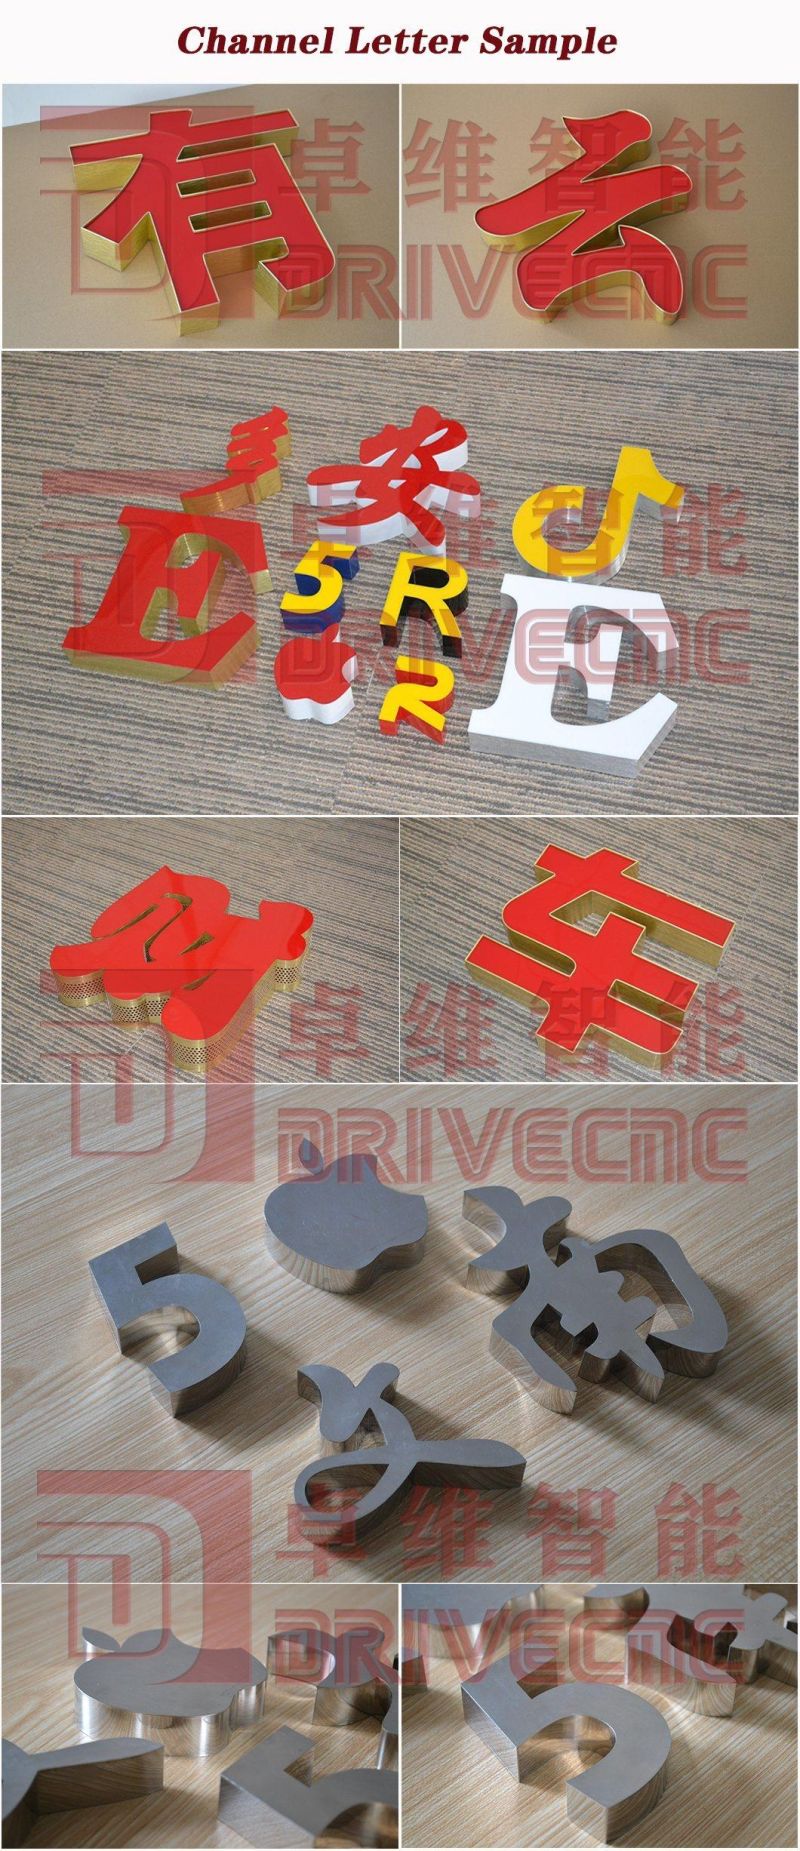 Good Quality 3 in 1 Channel Letter Bender